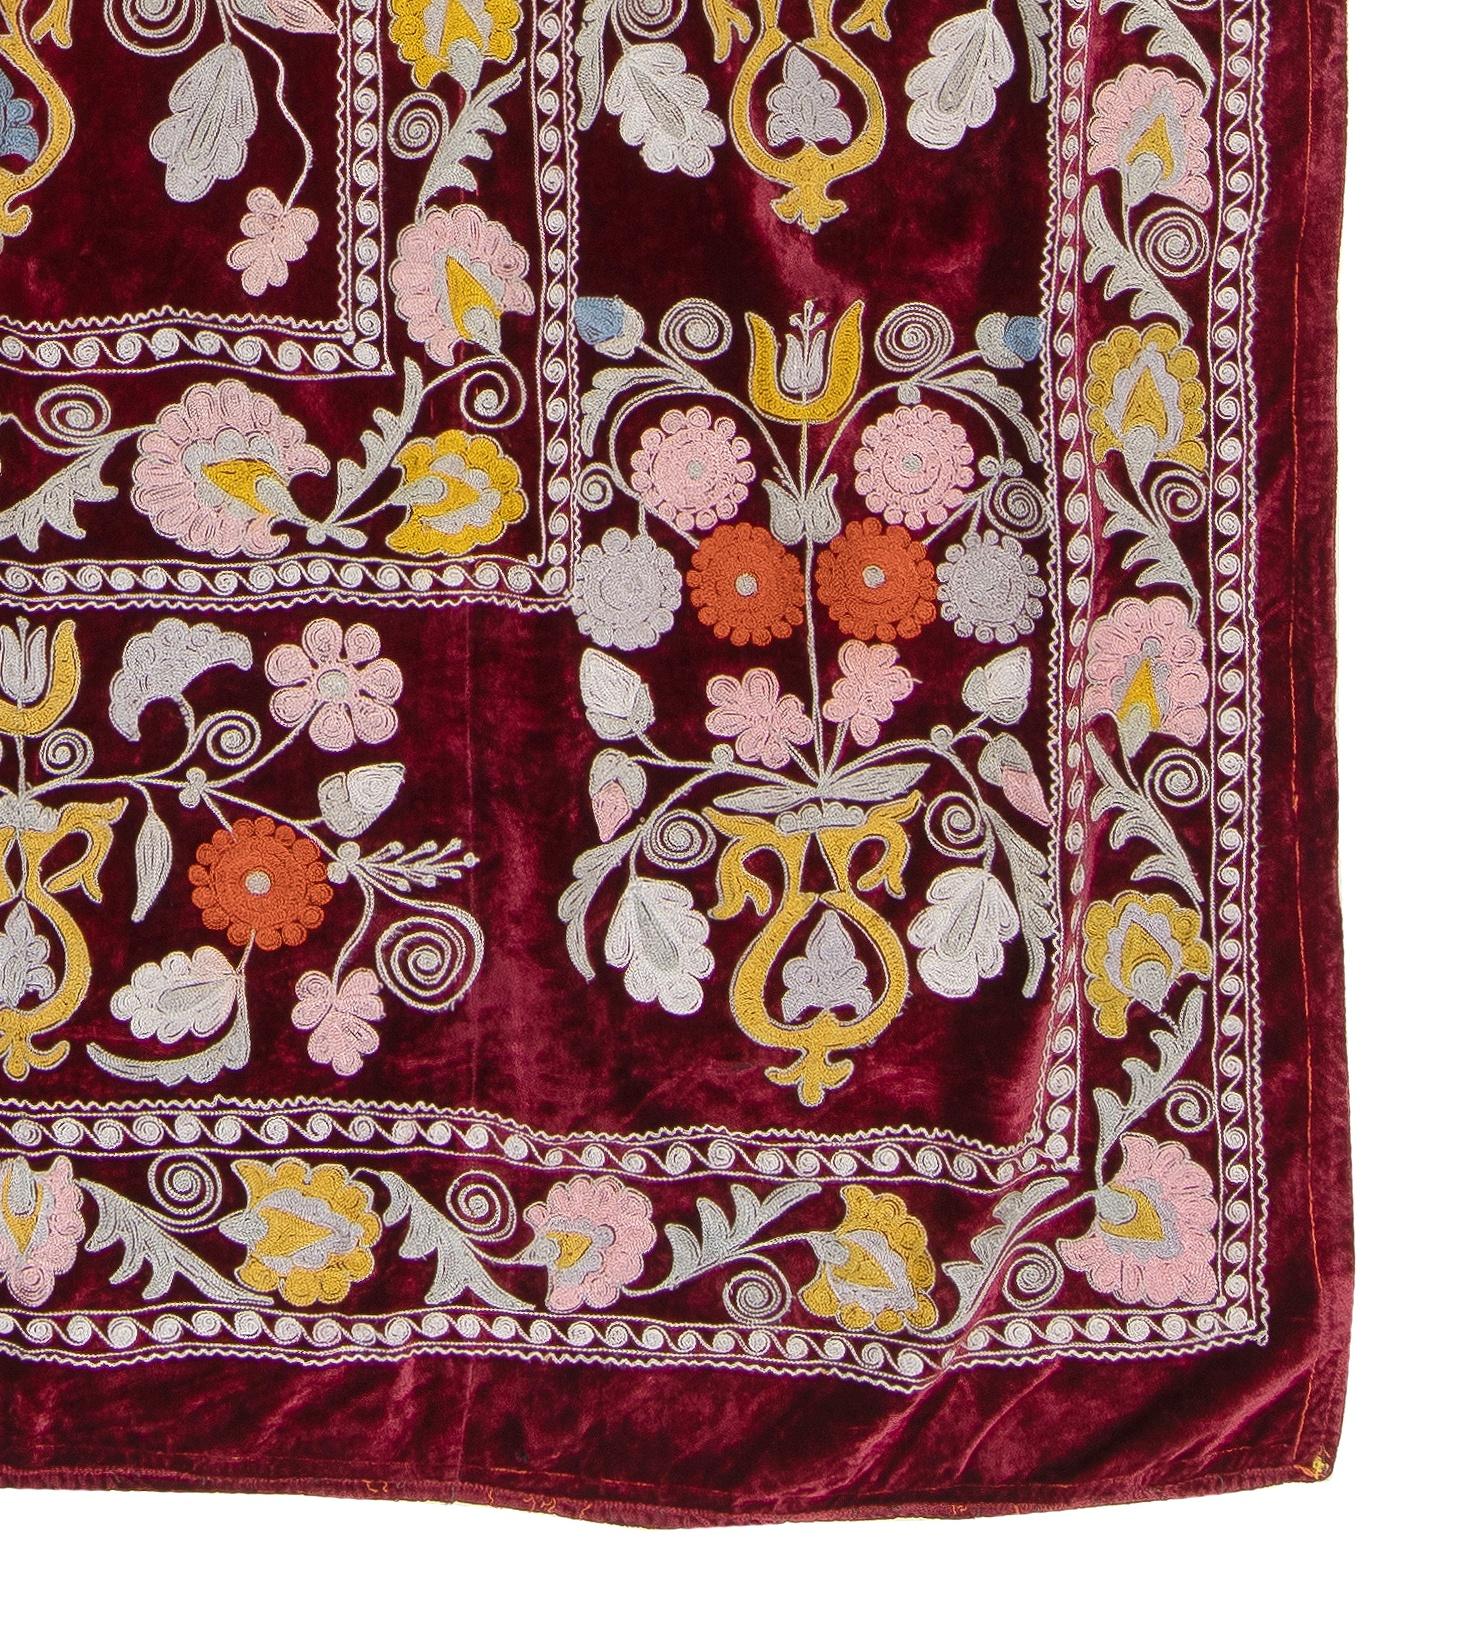 Cotton 4x7 Ft Vintage C. Asian Suzani Textile, Embroidered Wall Hanging or Bed Cover